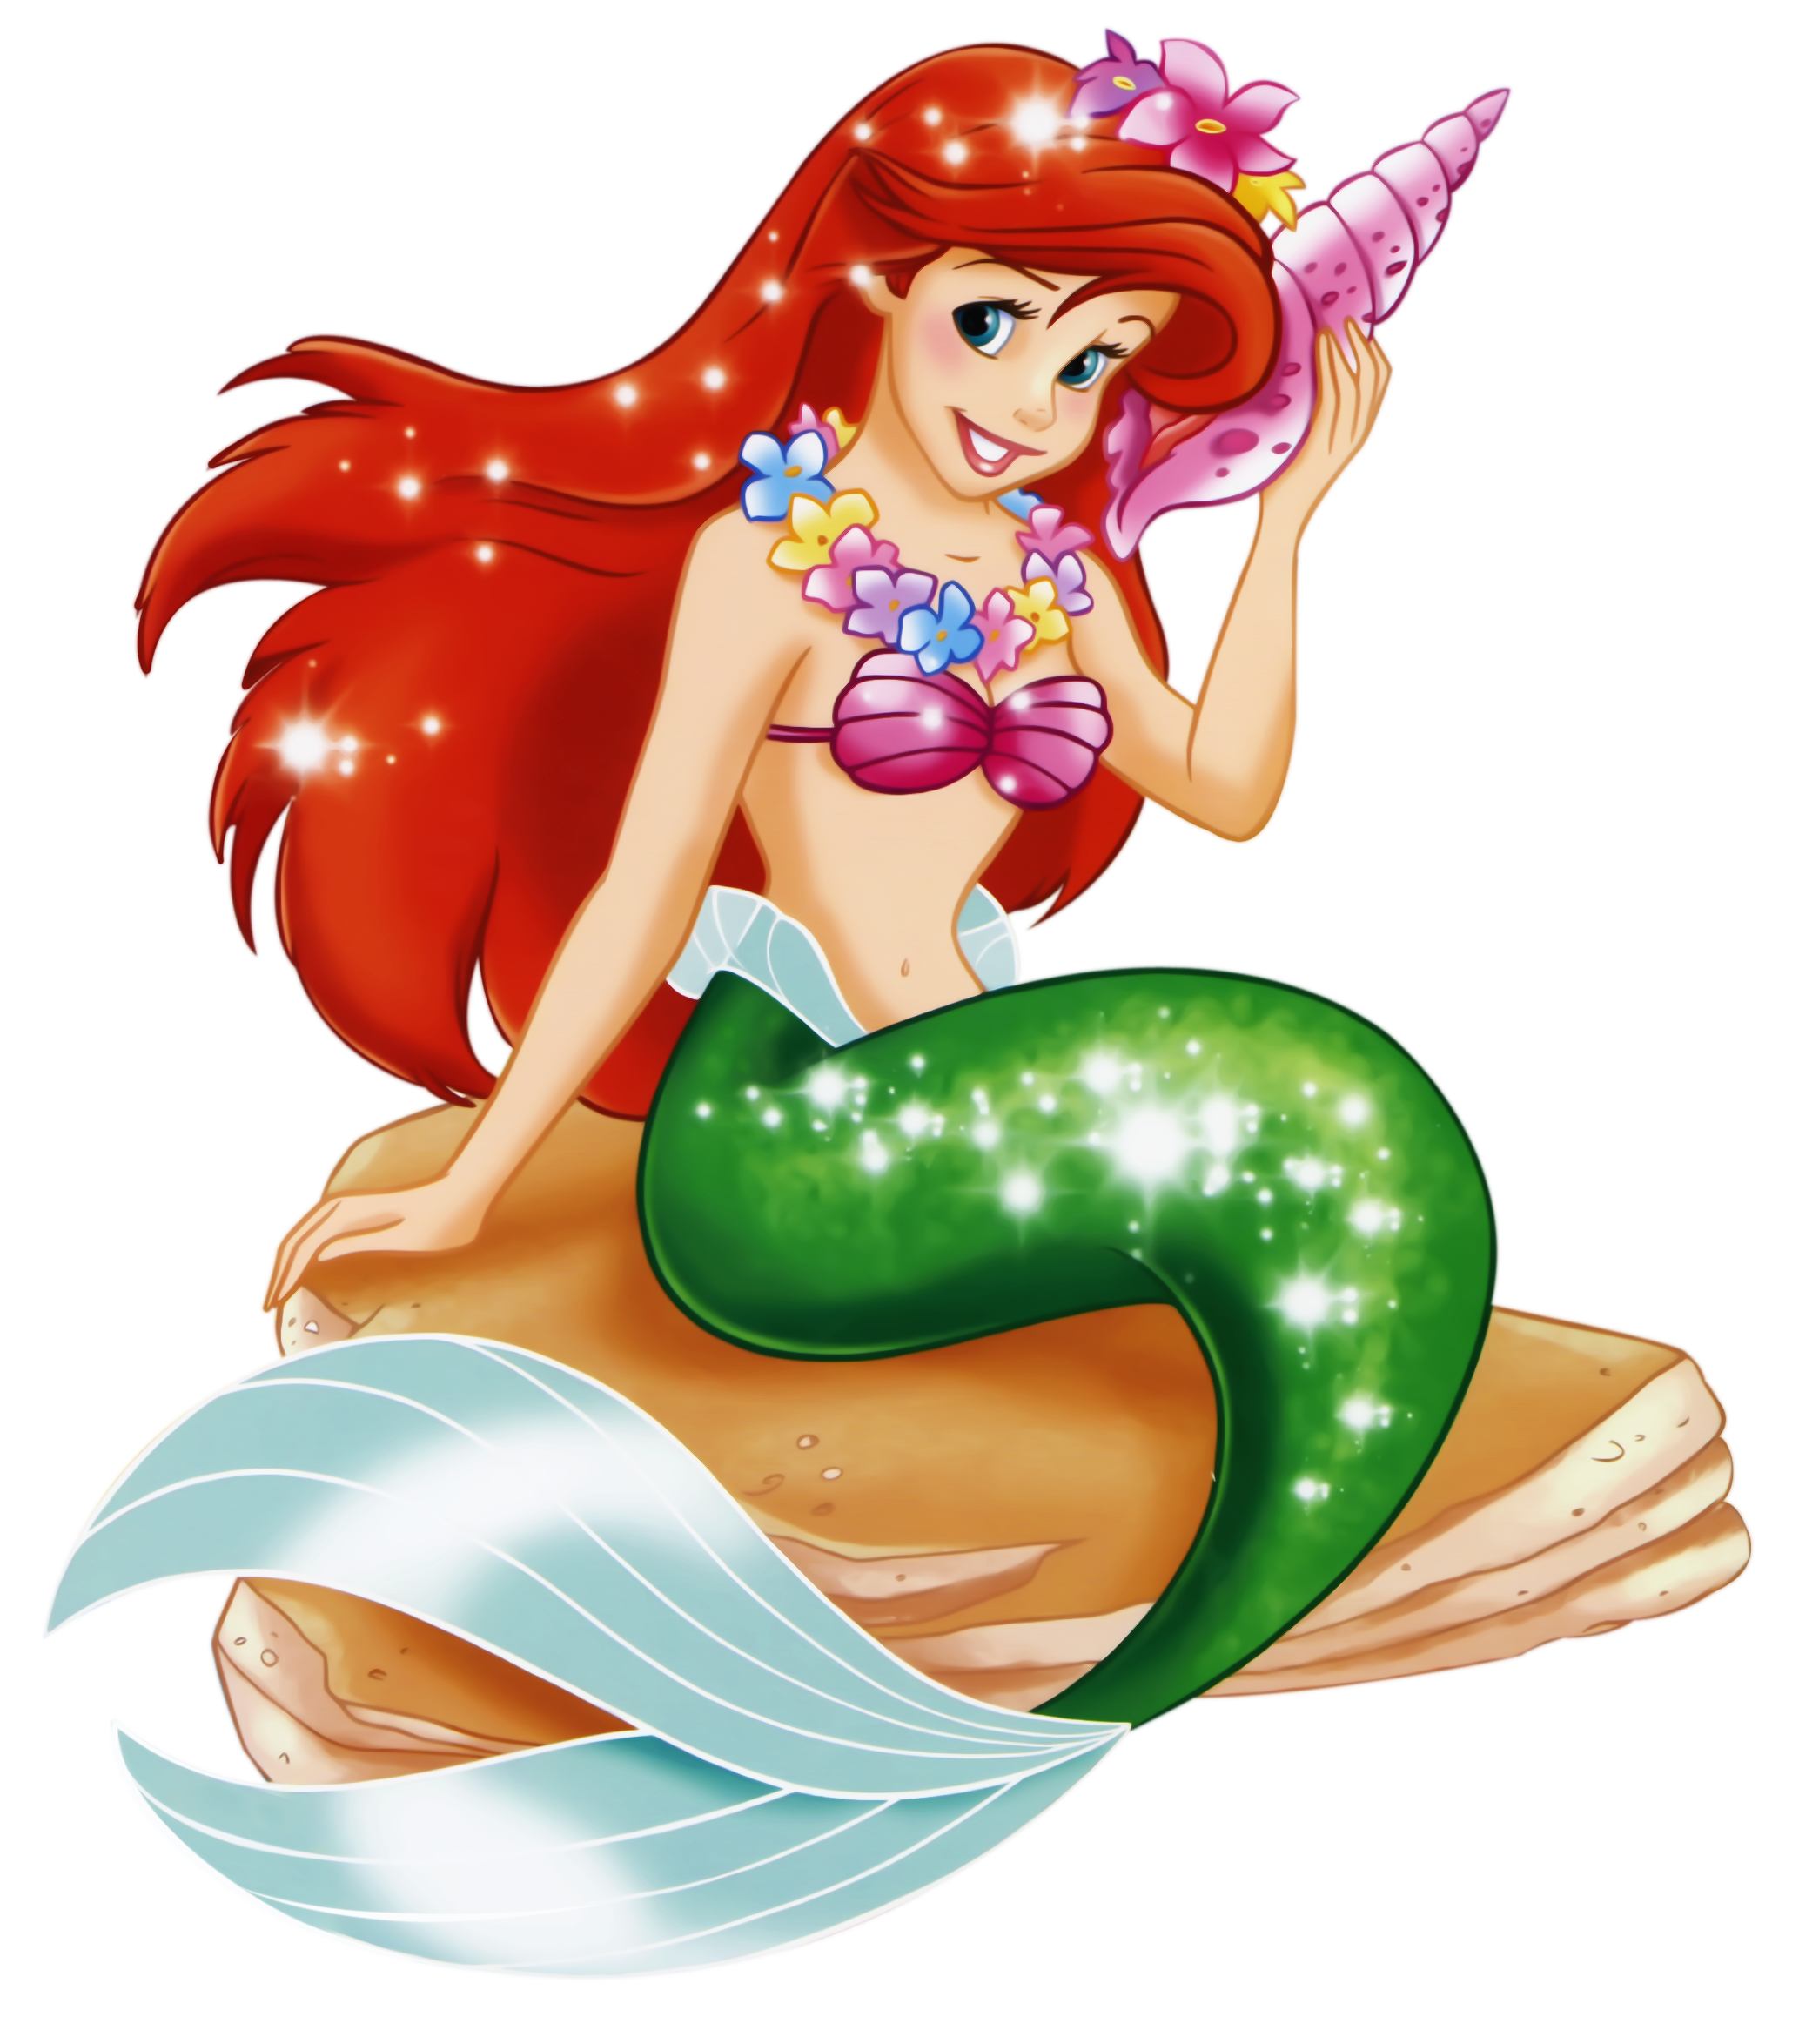 Arielle princess clipart gallery. Mermaid png images